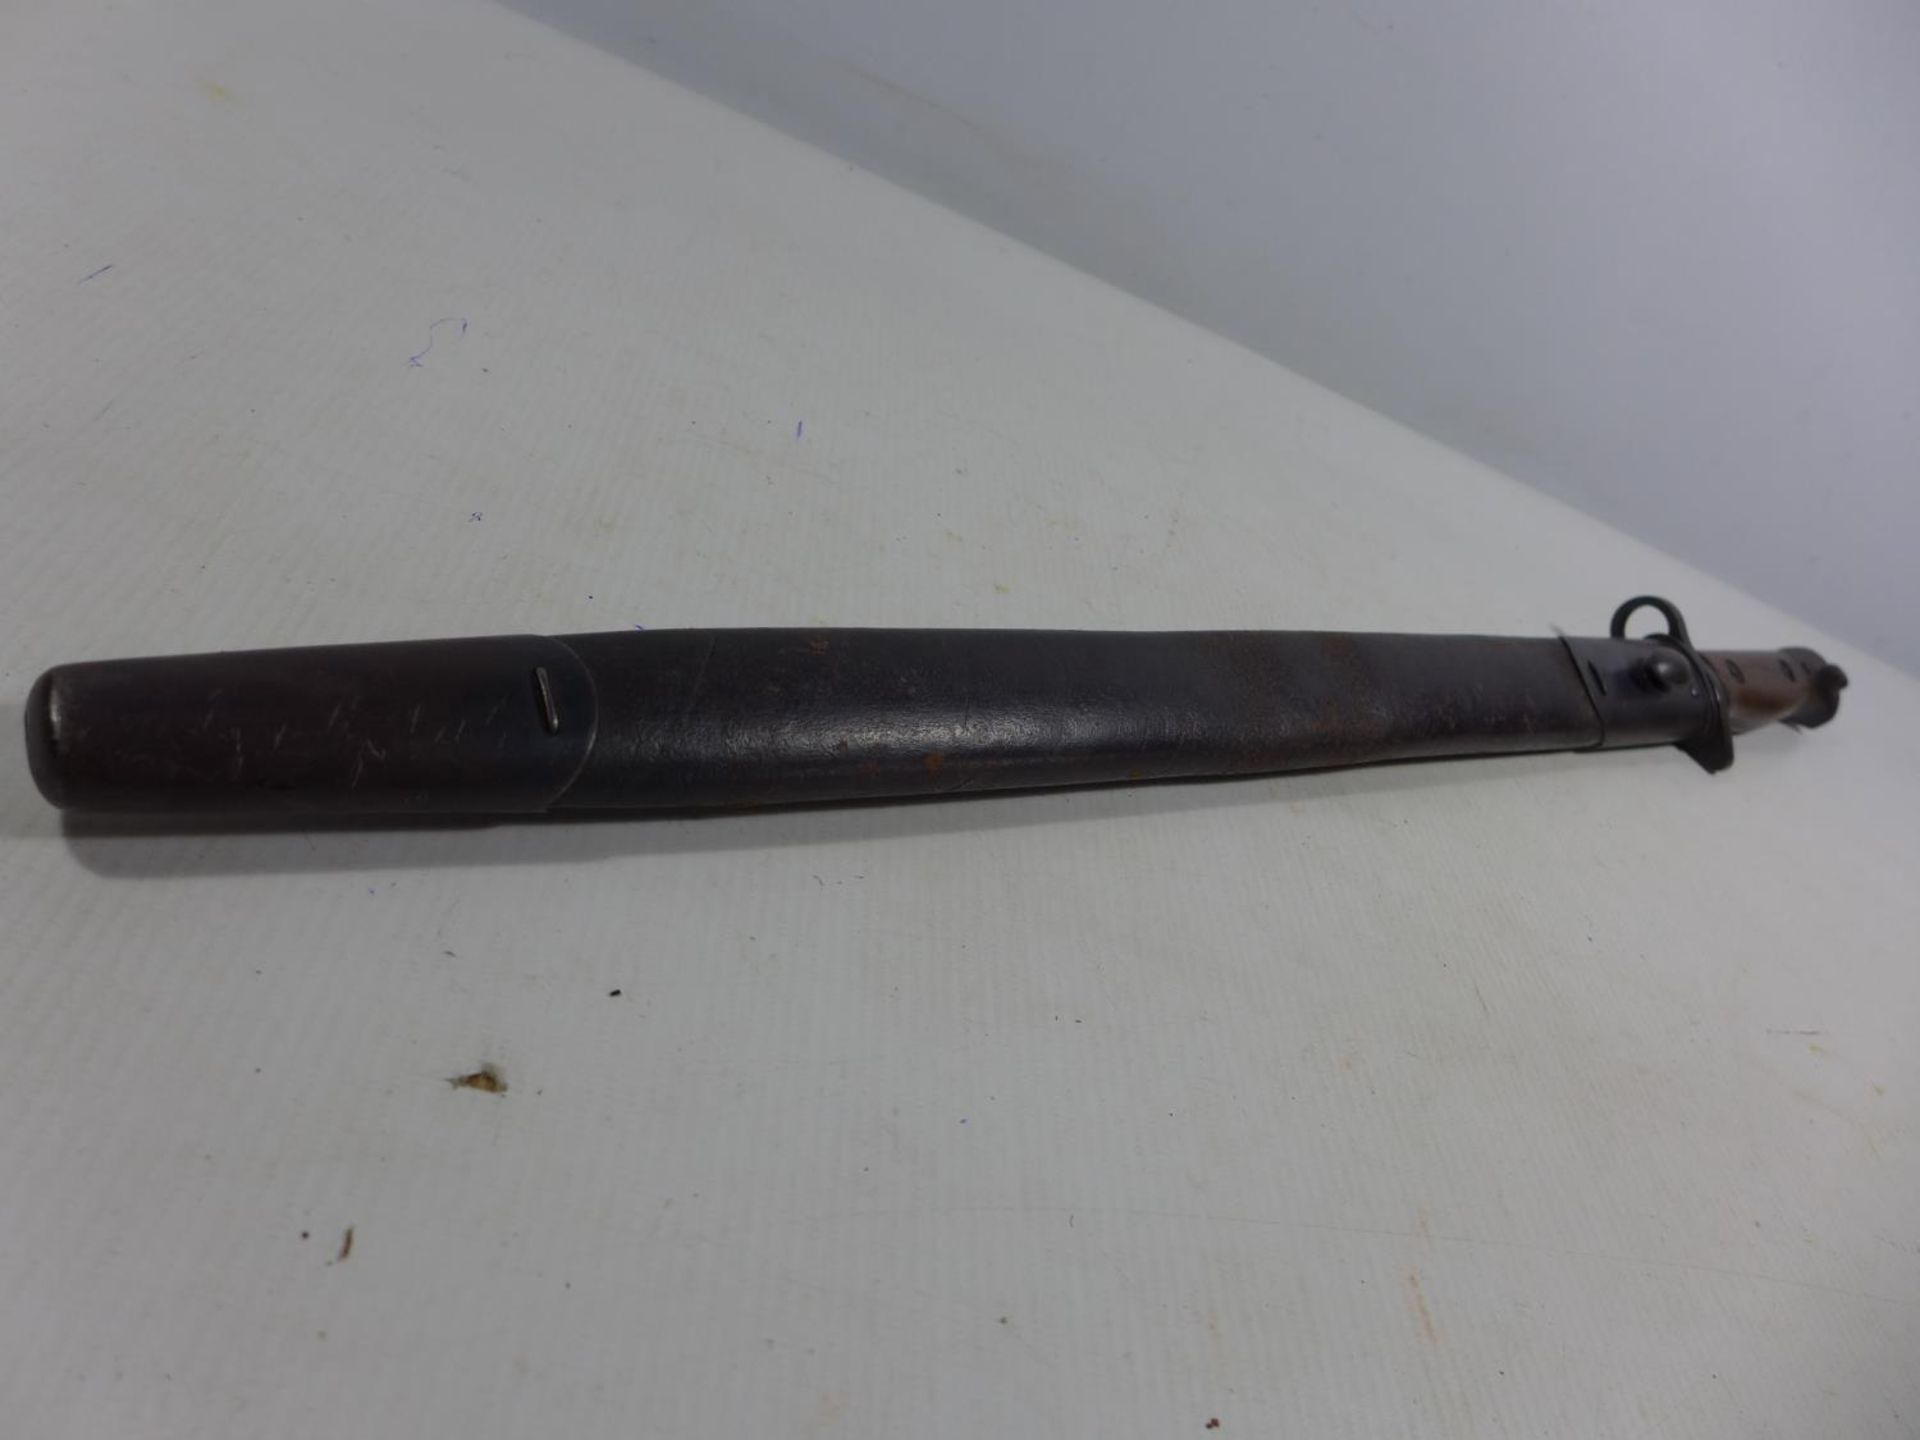 A BRITISH ARMY WORLD WAR I 1907 PATTERN BAYONET AND SCABBARD BY WILKINSON, 43CM BLADE - Image 6 of 7